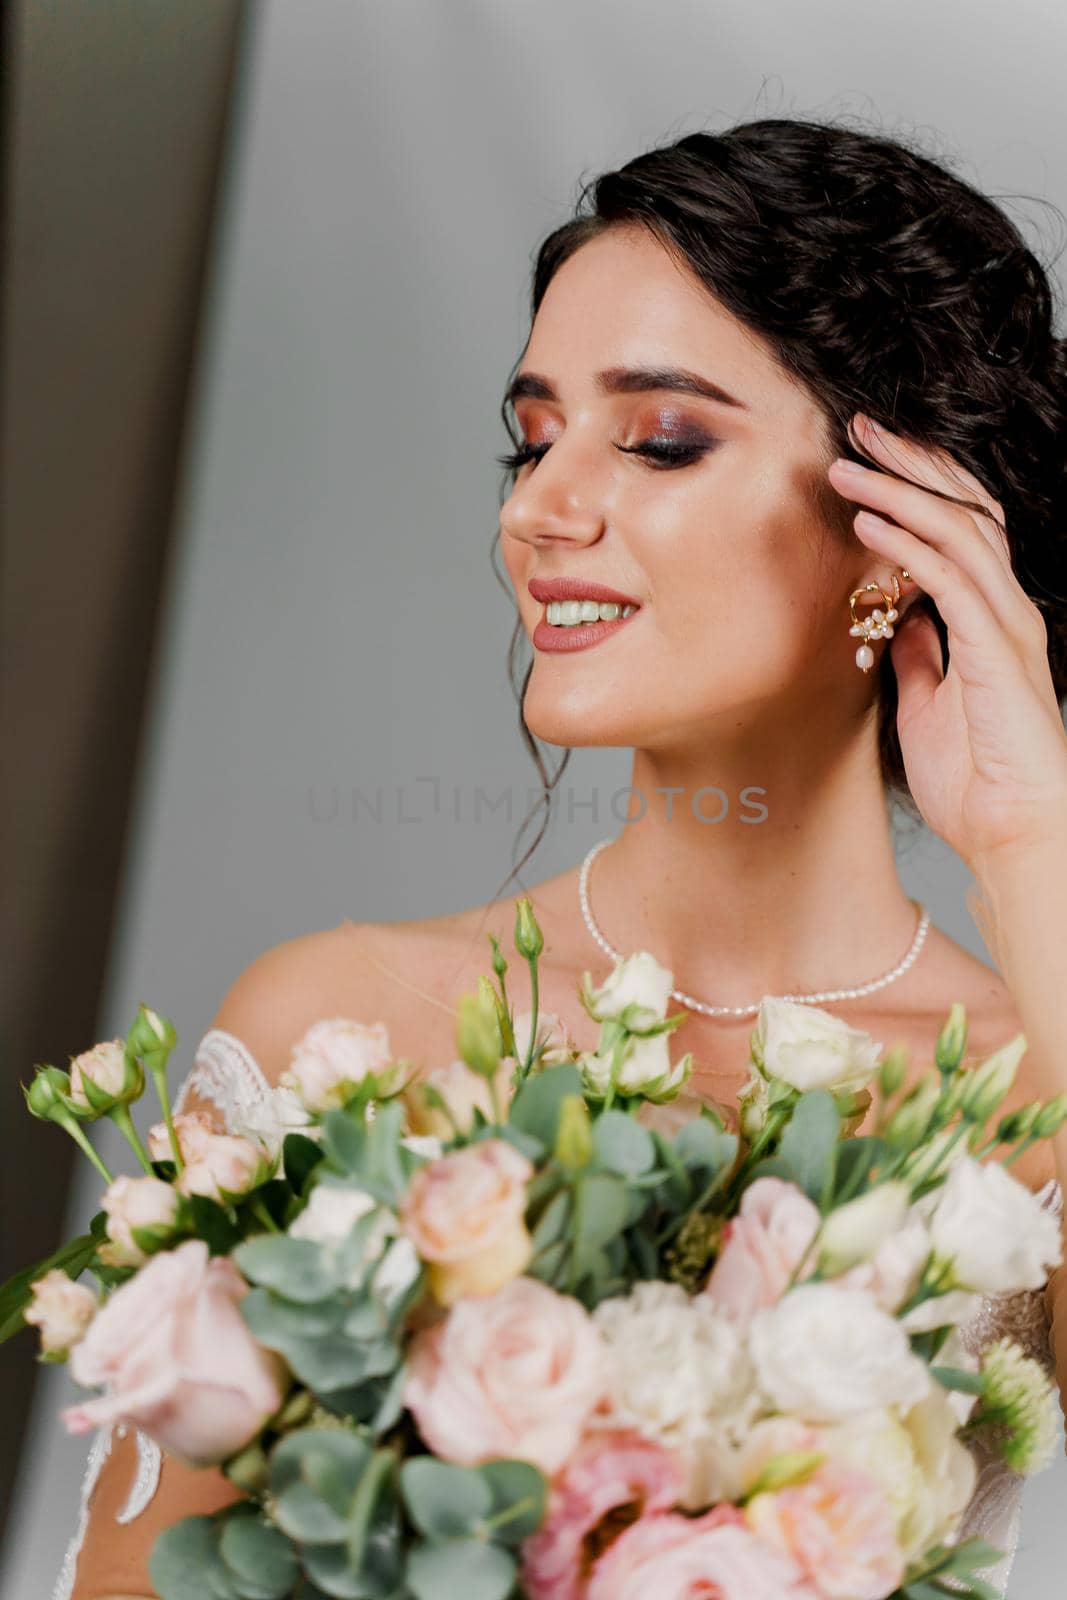 Bride with wedding bouquet smiles and touches her face and hair. Attractive girl portrait for social networks. Girl in wedding gown on blank background